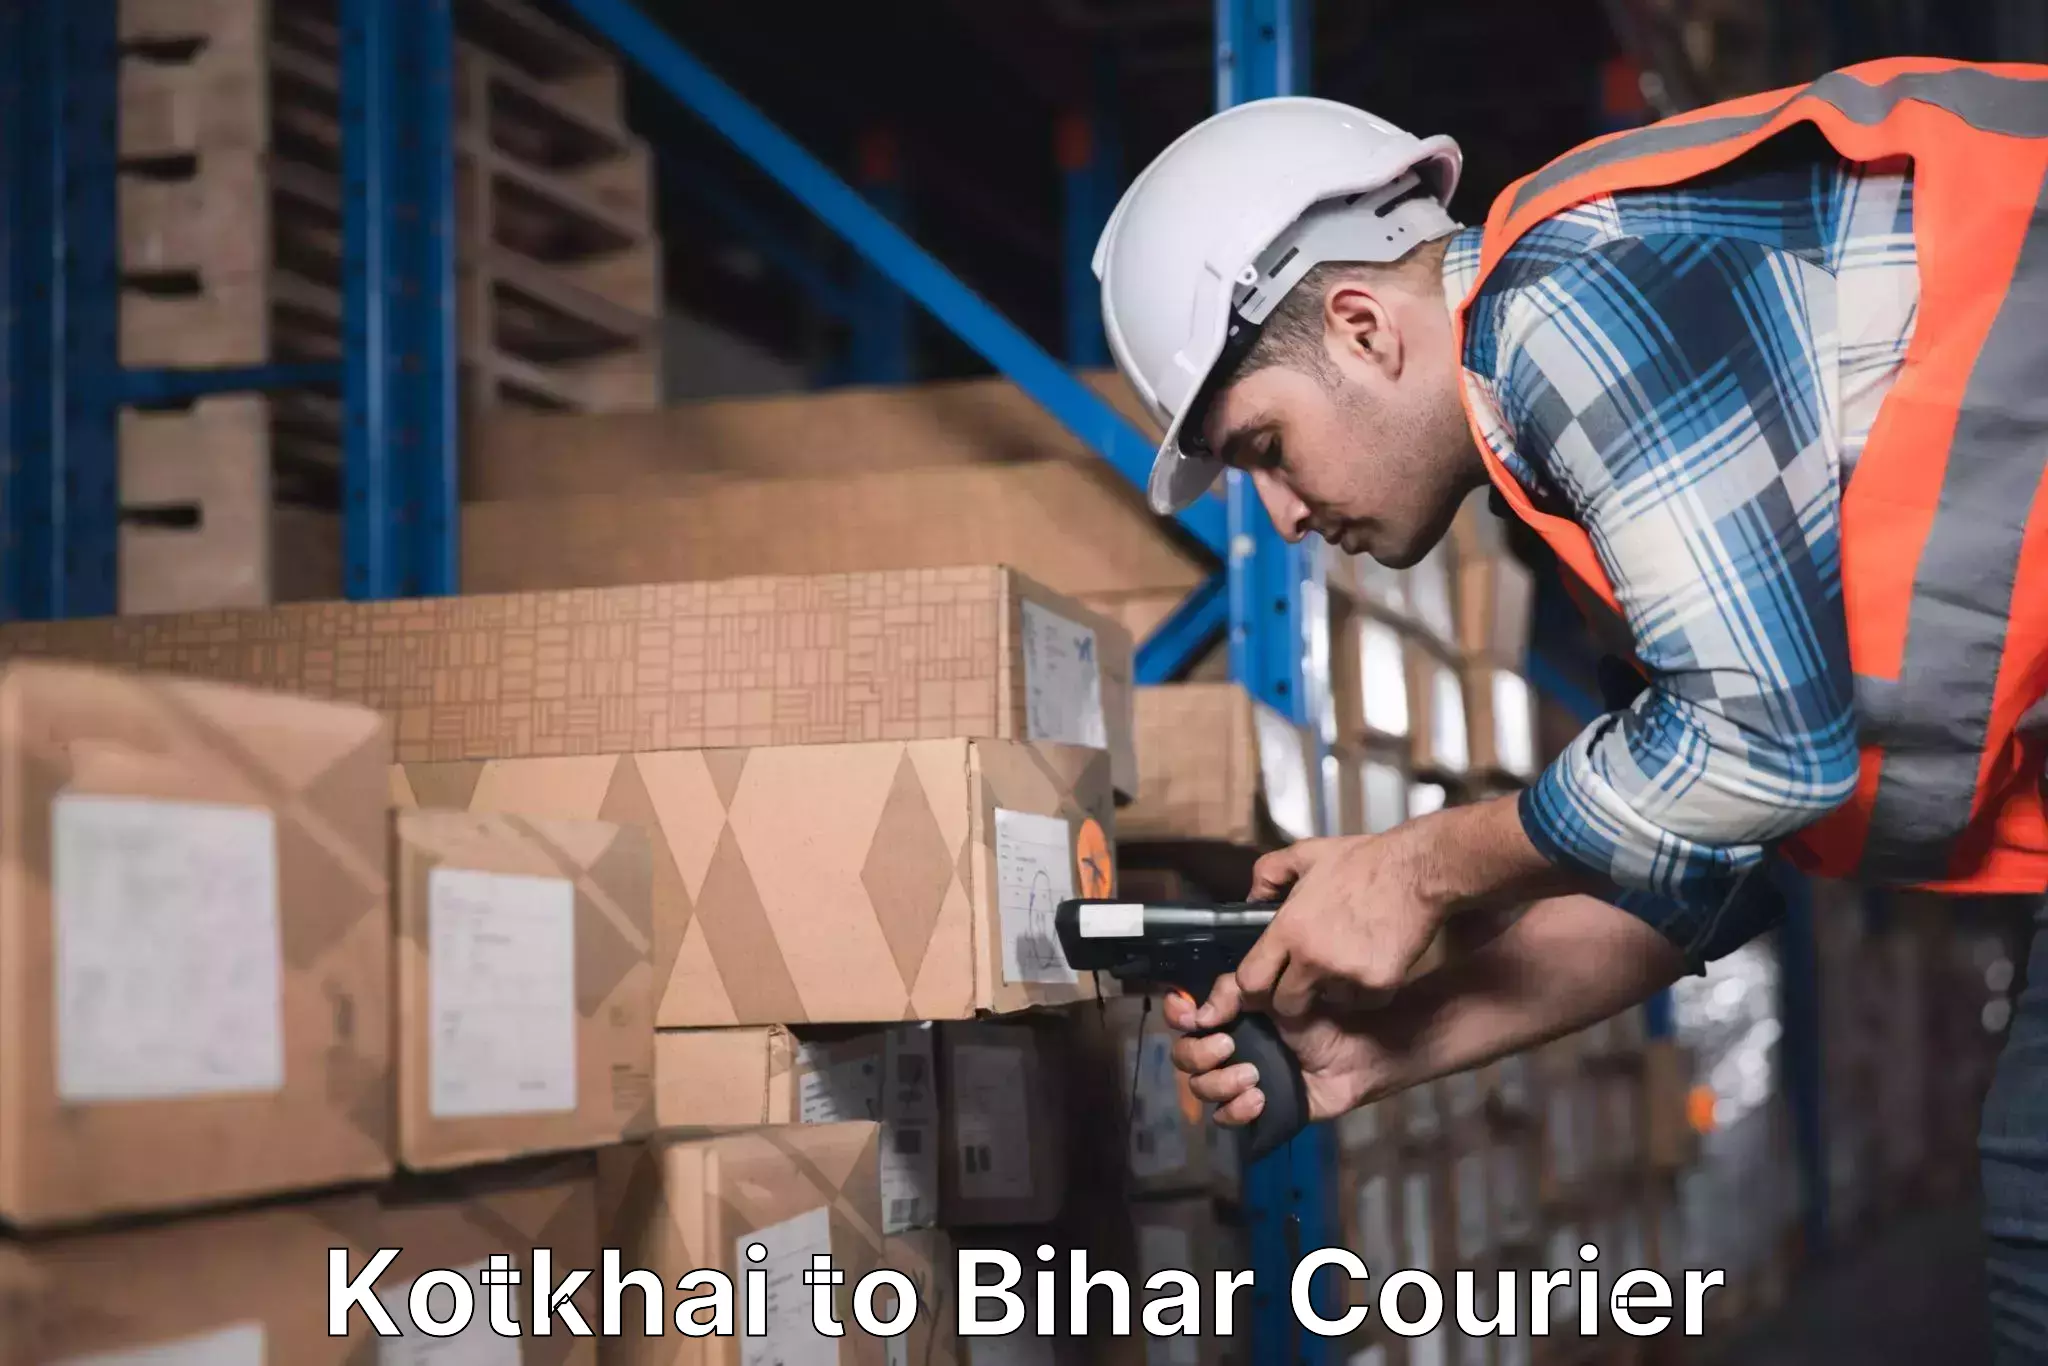 Courier service partnerships in Kotkhai to Pupri